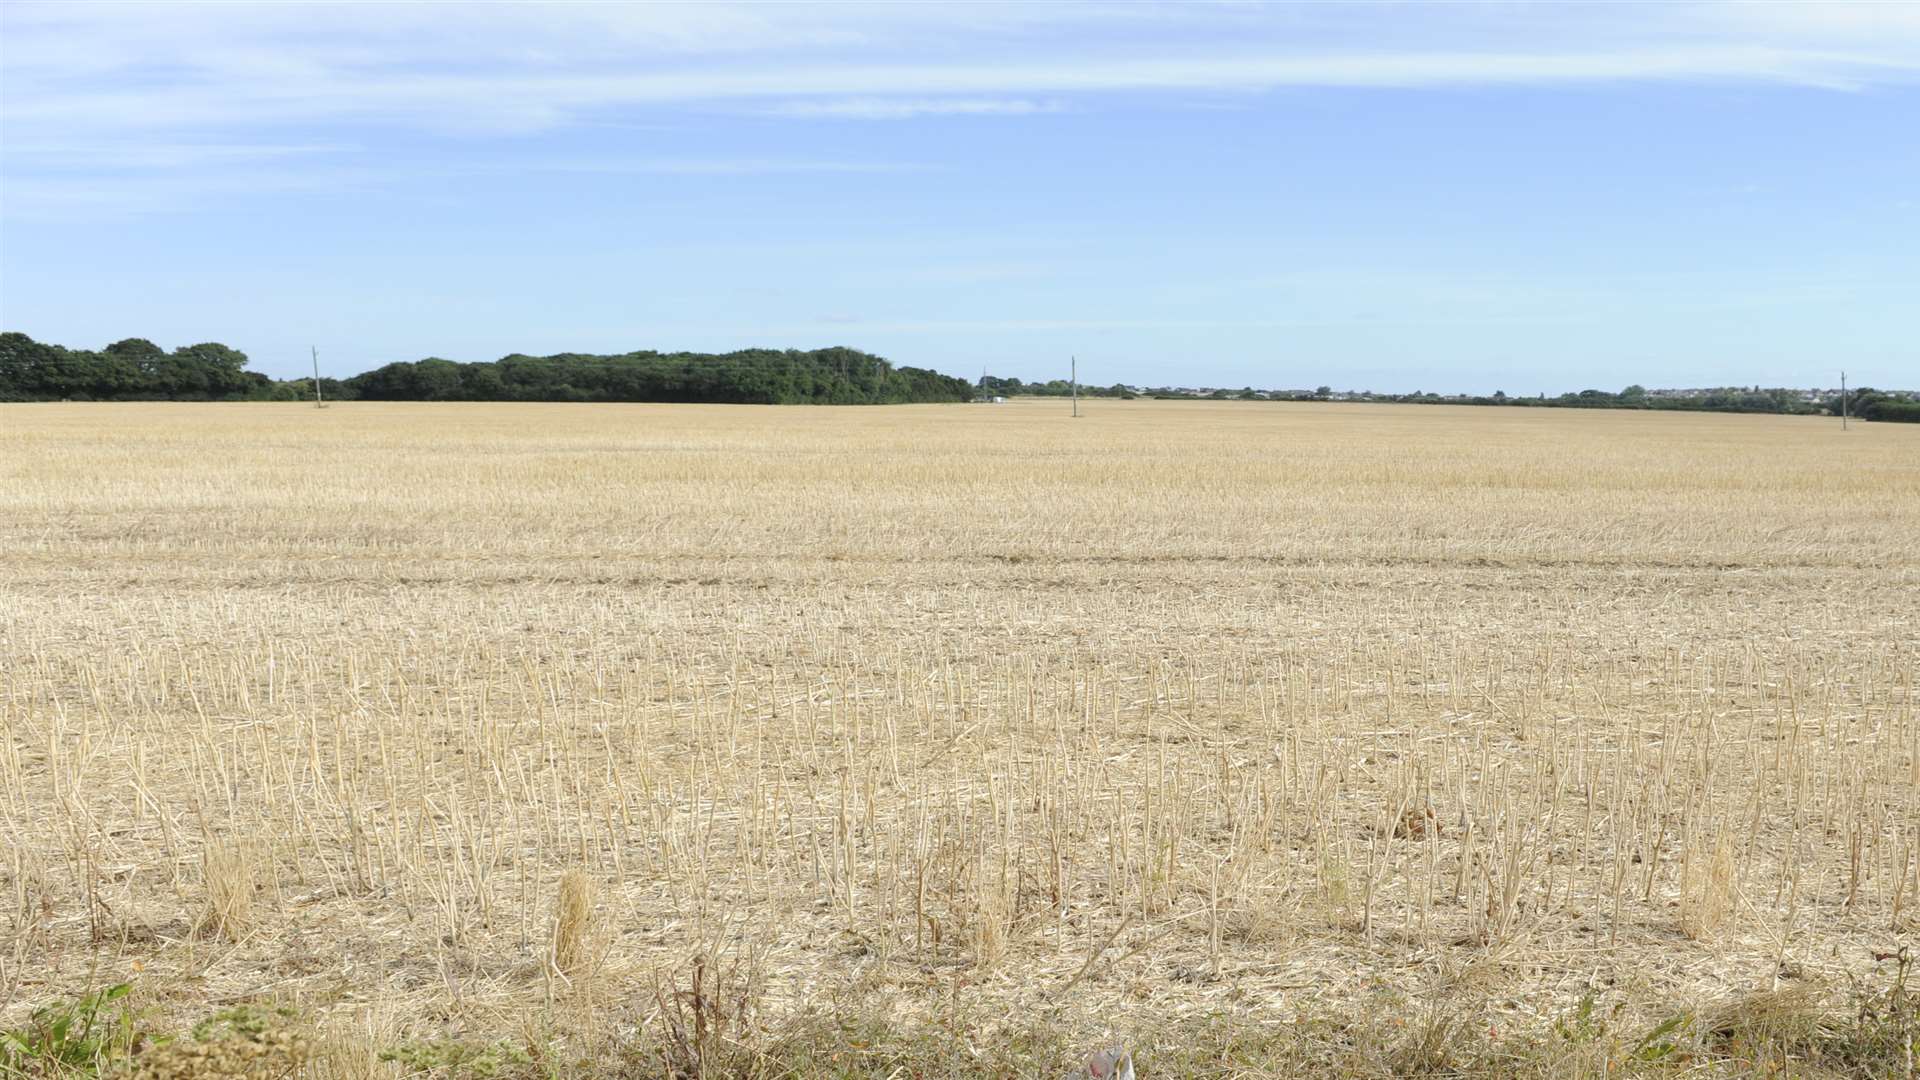 This field could be filled with solar panels powering thousands of homes